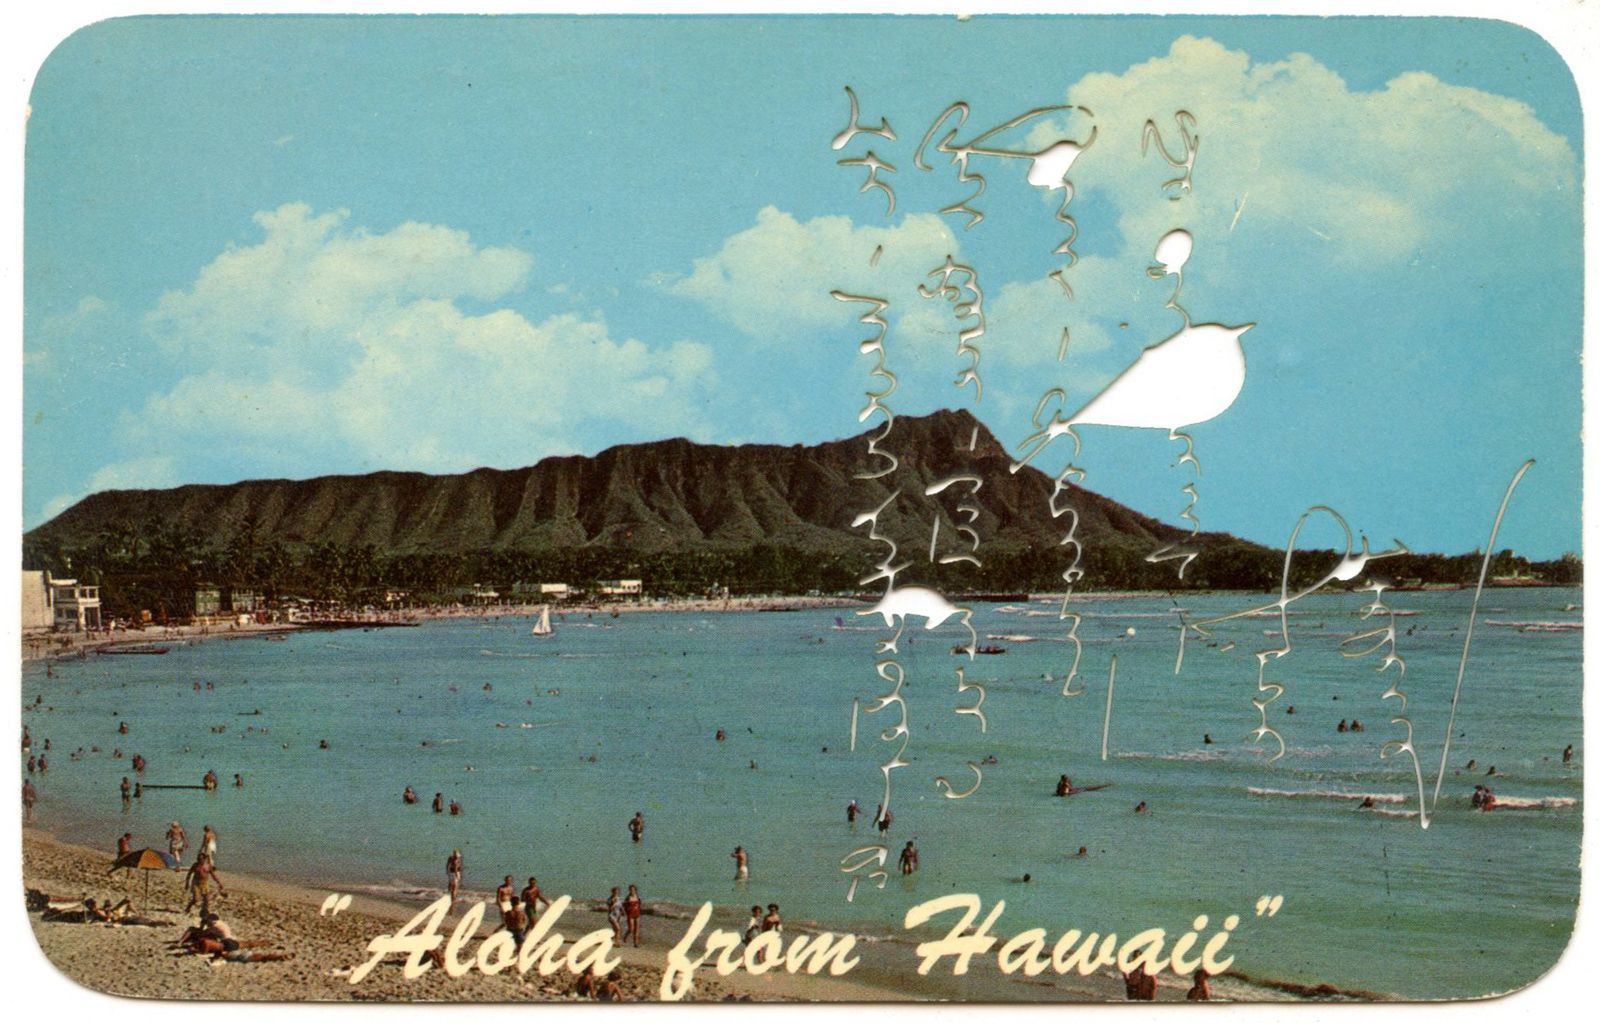 © Leah Schretenthaler - Image from the Aloha From Hawaii photography project